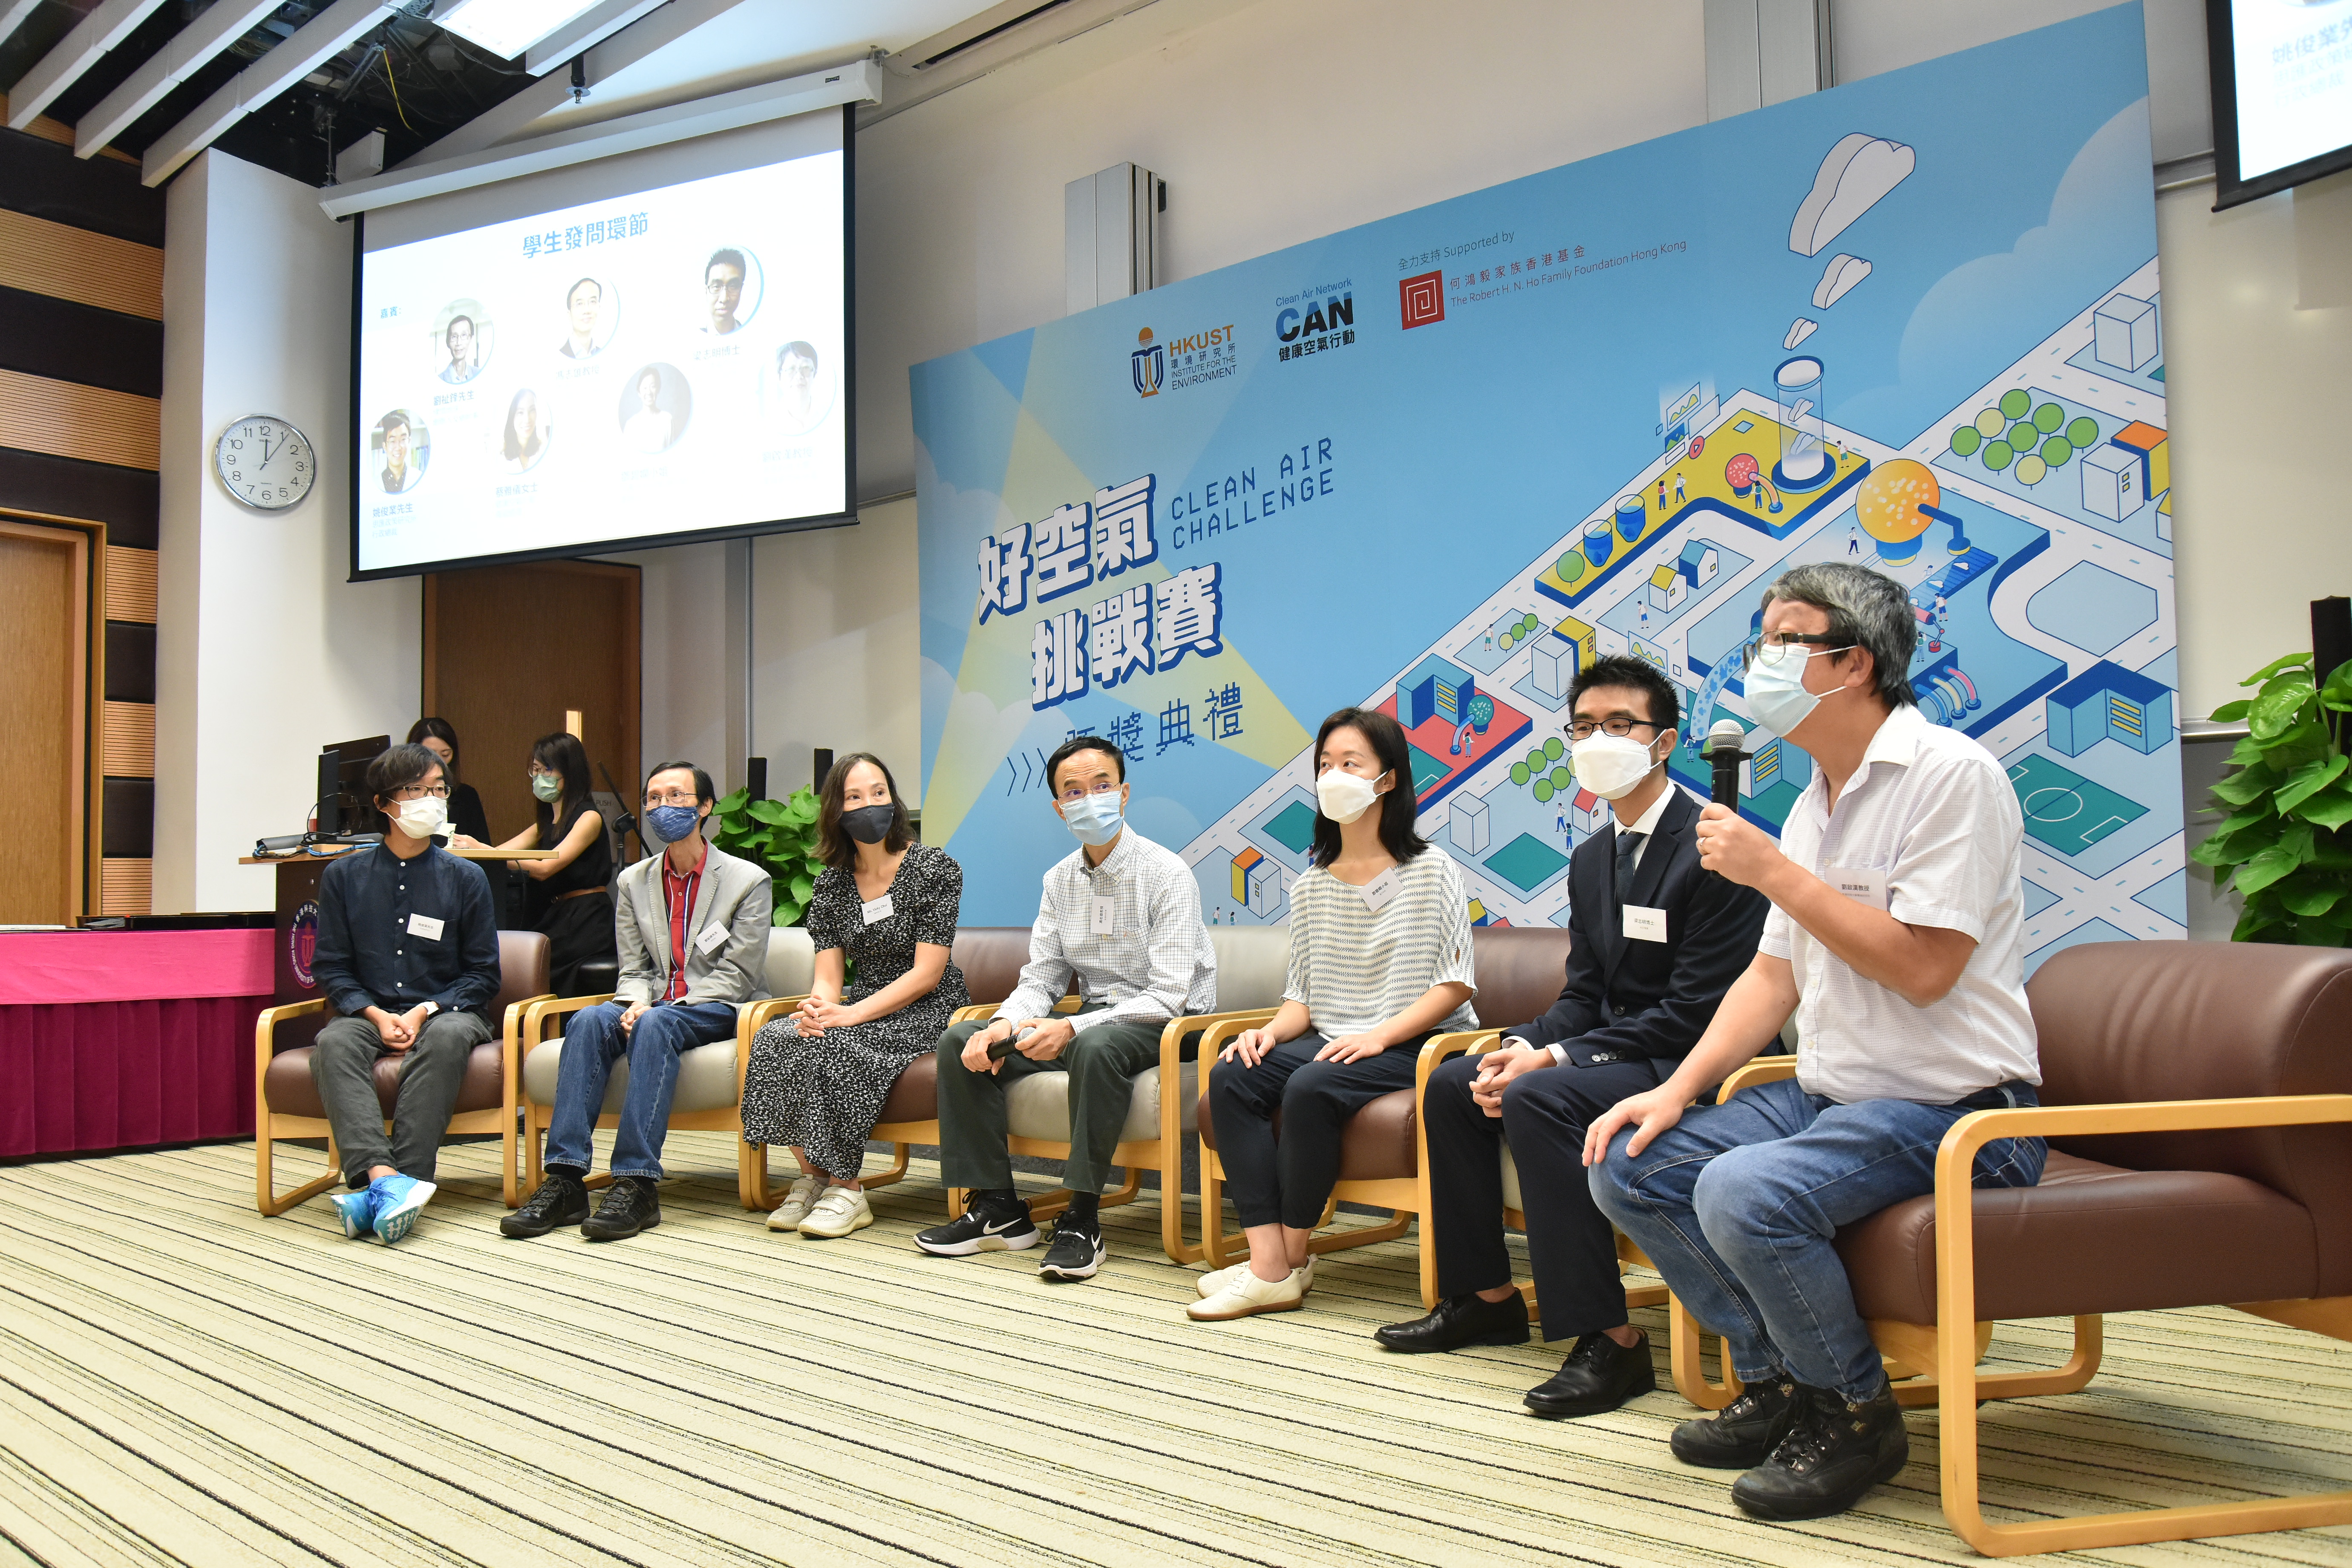 Professors and experts interacted with students and shared their insights in clean air challenge at a panel discussion.